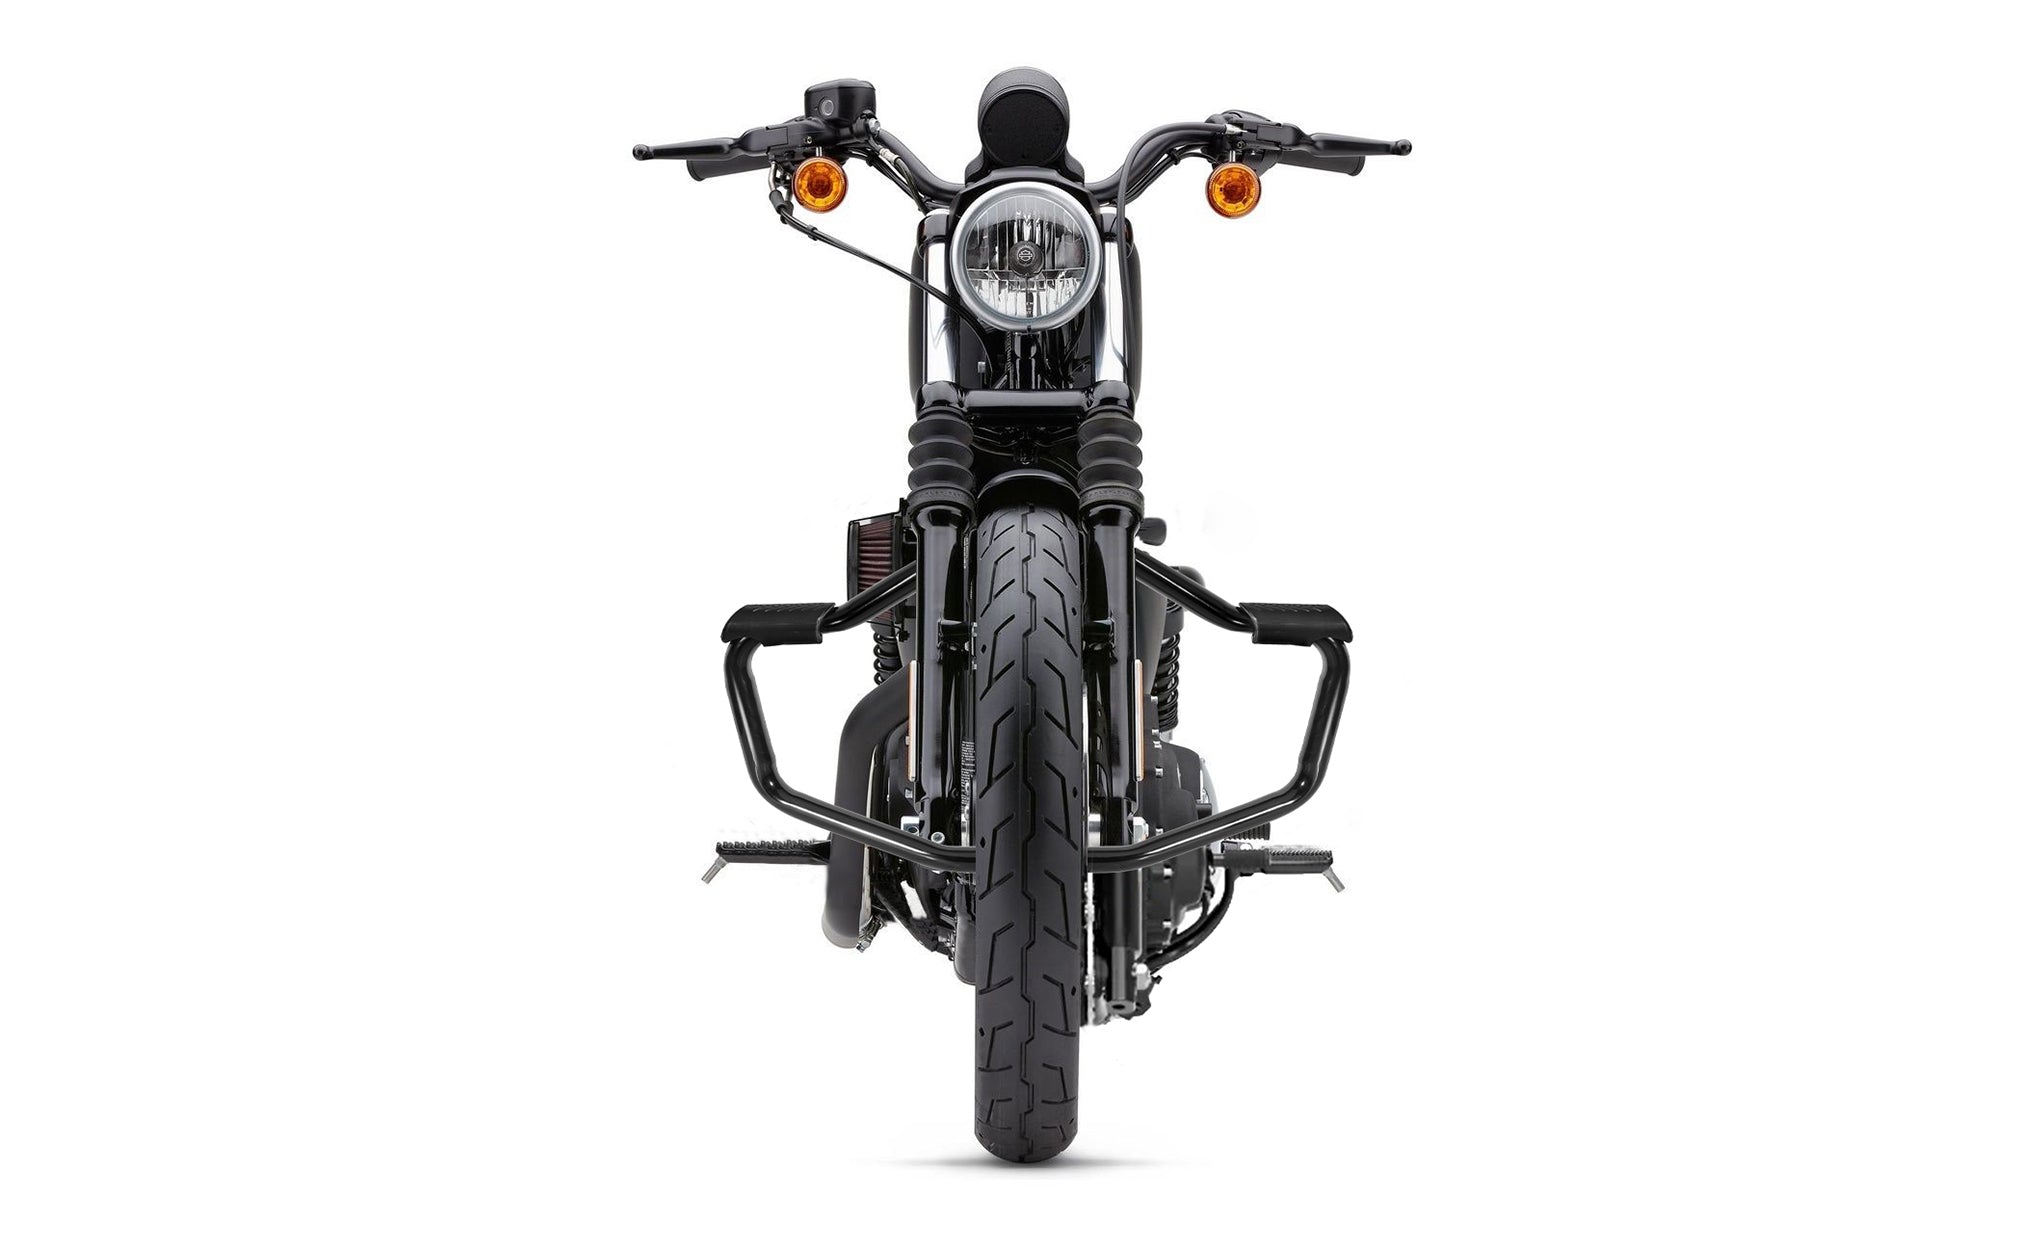 Viking Iron Born Motorcycle Crash Bar/Engine Guard for Harley Sportster Seventy Two Gloss Black Bag on Bike View @expand